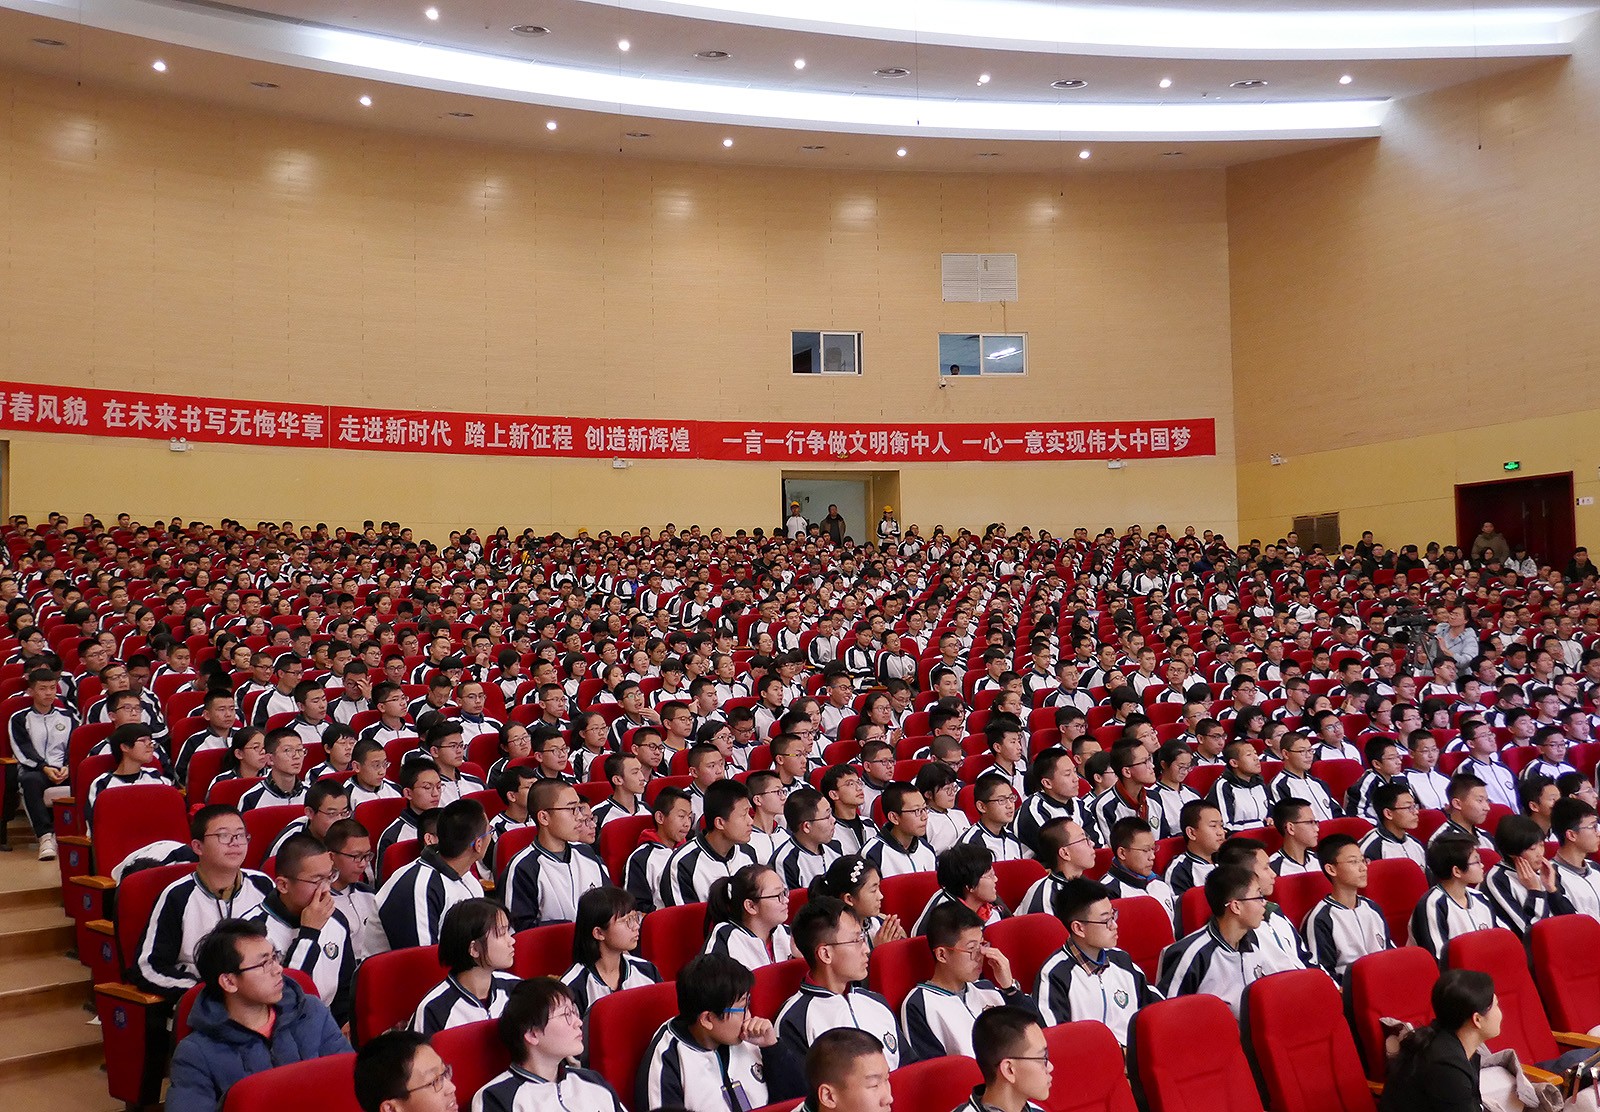 Around 1,400 students from Hengshui High School listen to Professor Kuo’s talk.